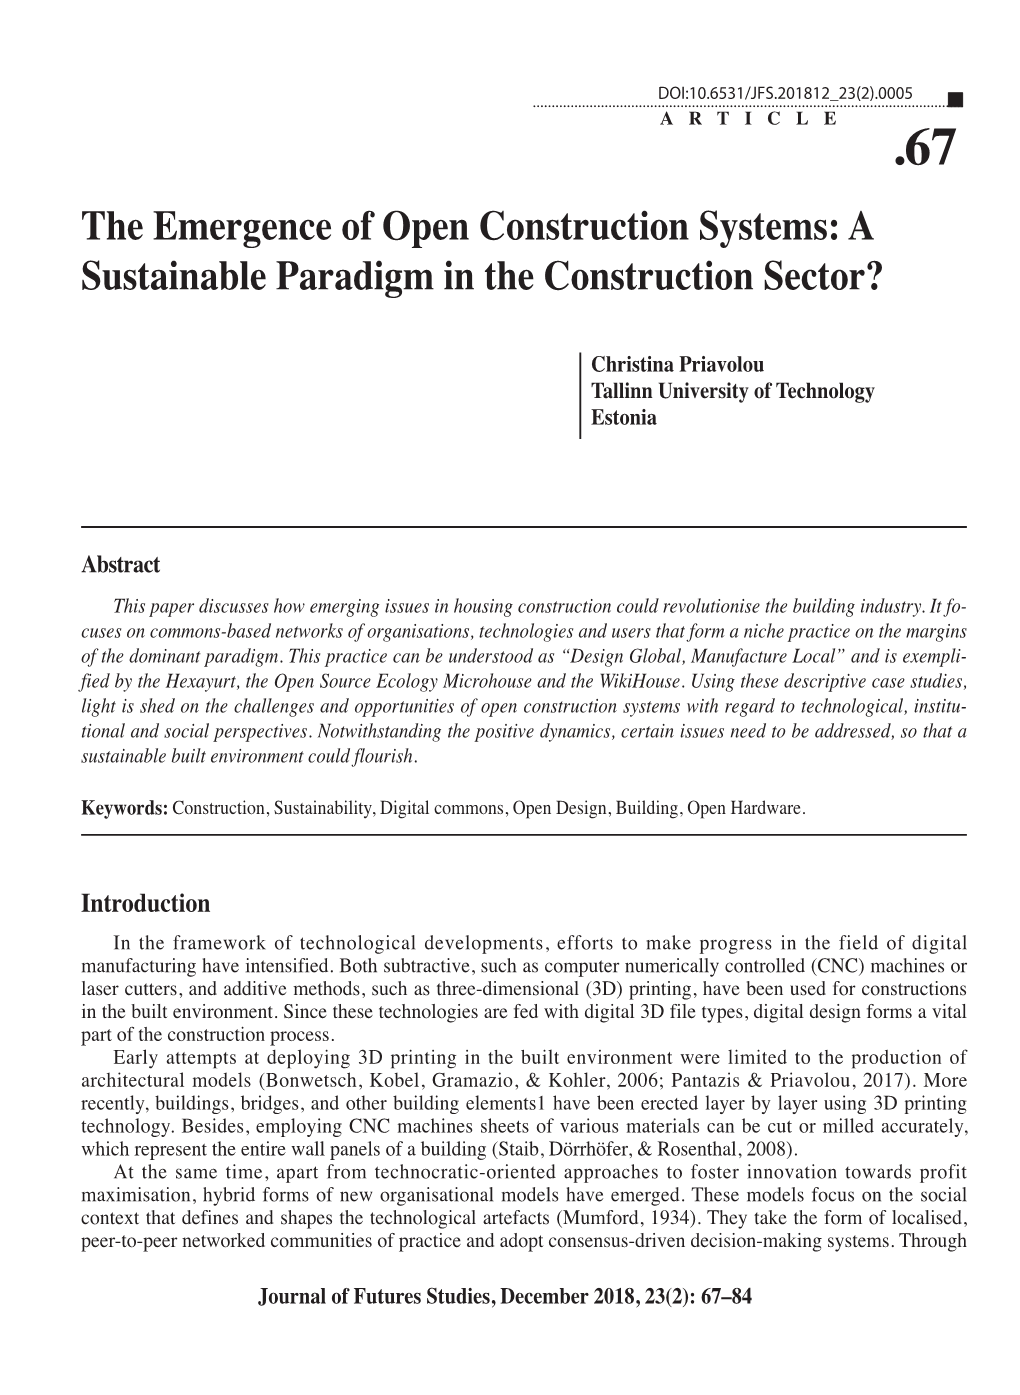 The Emergence of Open Construction Systems: a Sustainable Paradigm in the Construction Sector?